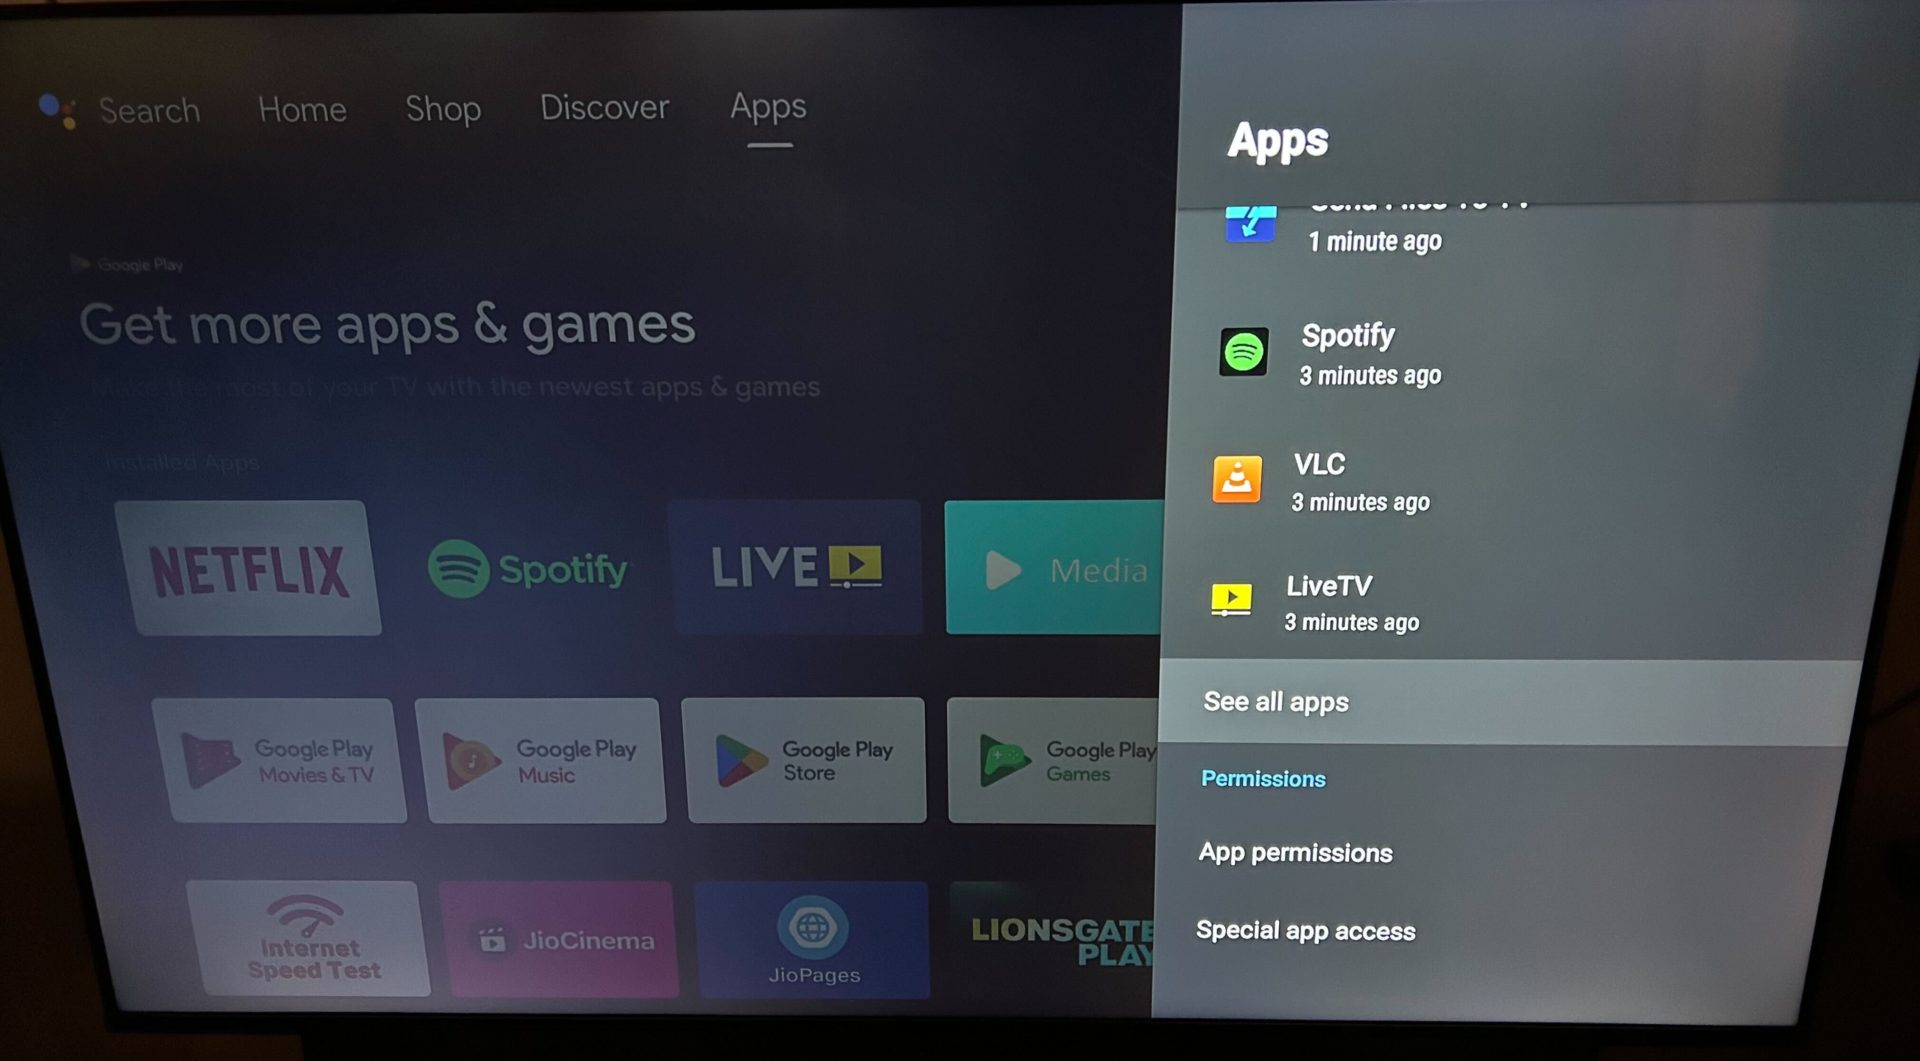 Android TV See all apps option